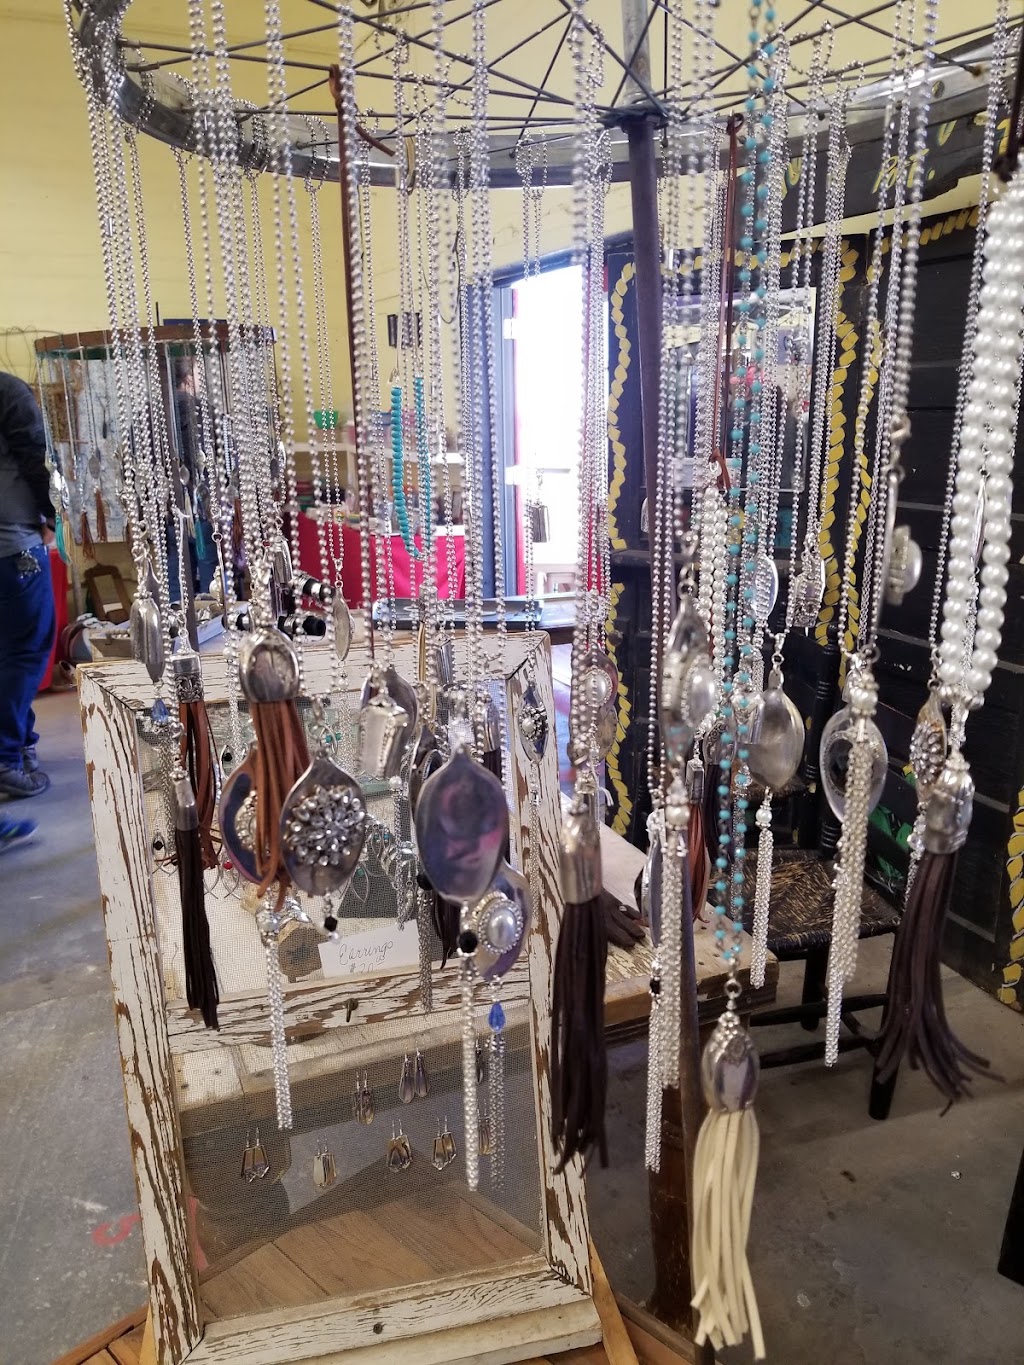 Old Mill Trade Days | 318 S Avenue F, Post, TX 79356, USA | Phone: (806) 990-7635